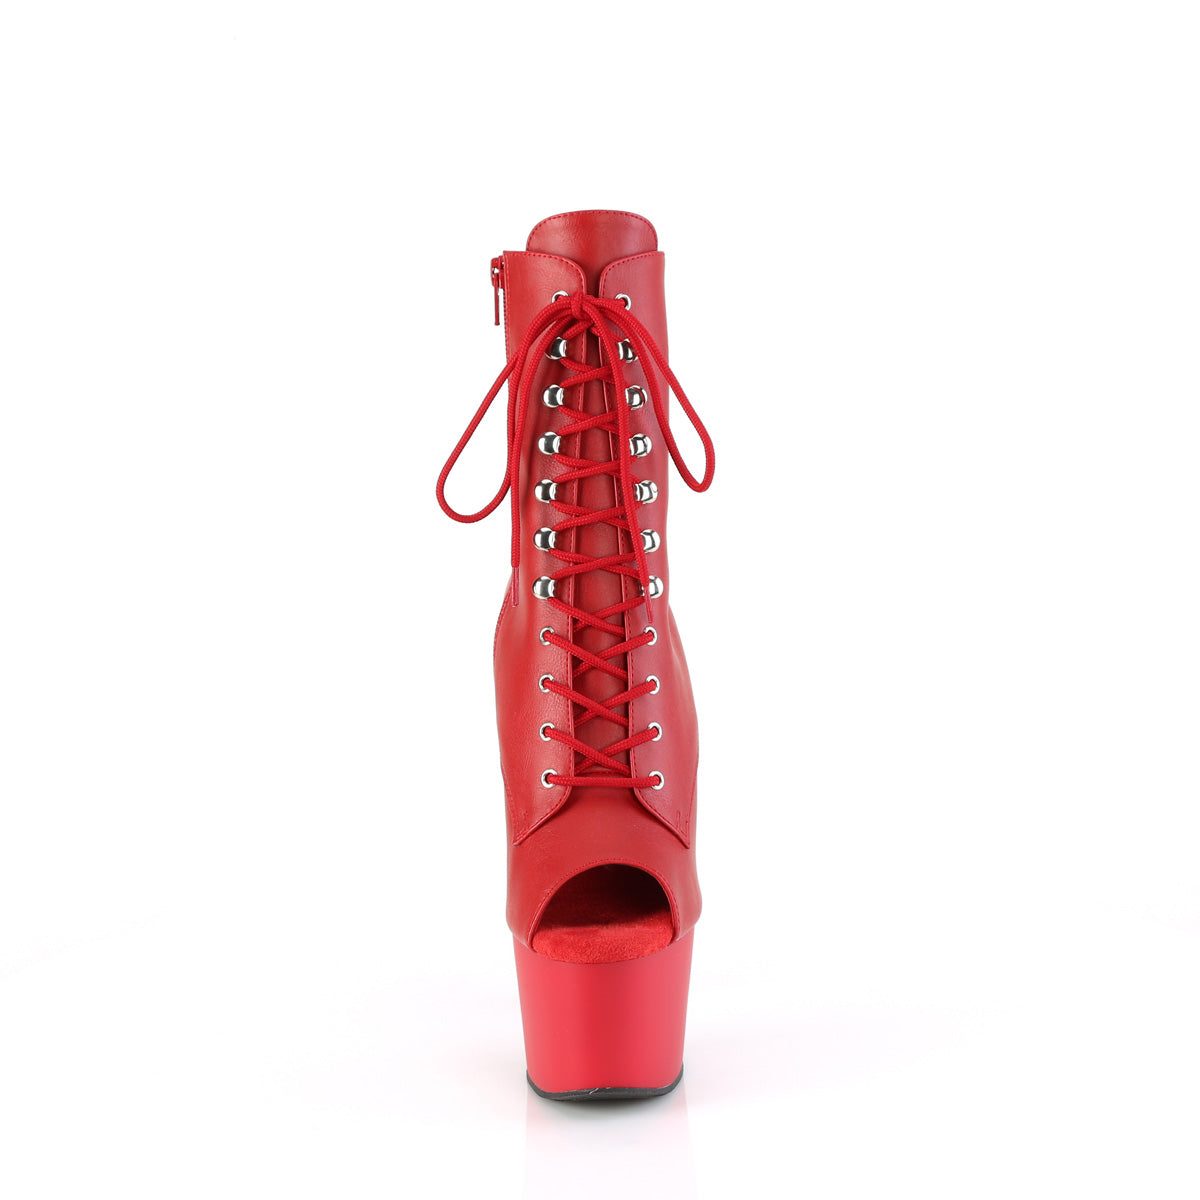 ADORE-1021 Red Faux Leather Calf High Peep Toe Boots